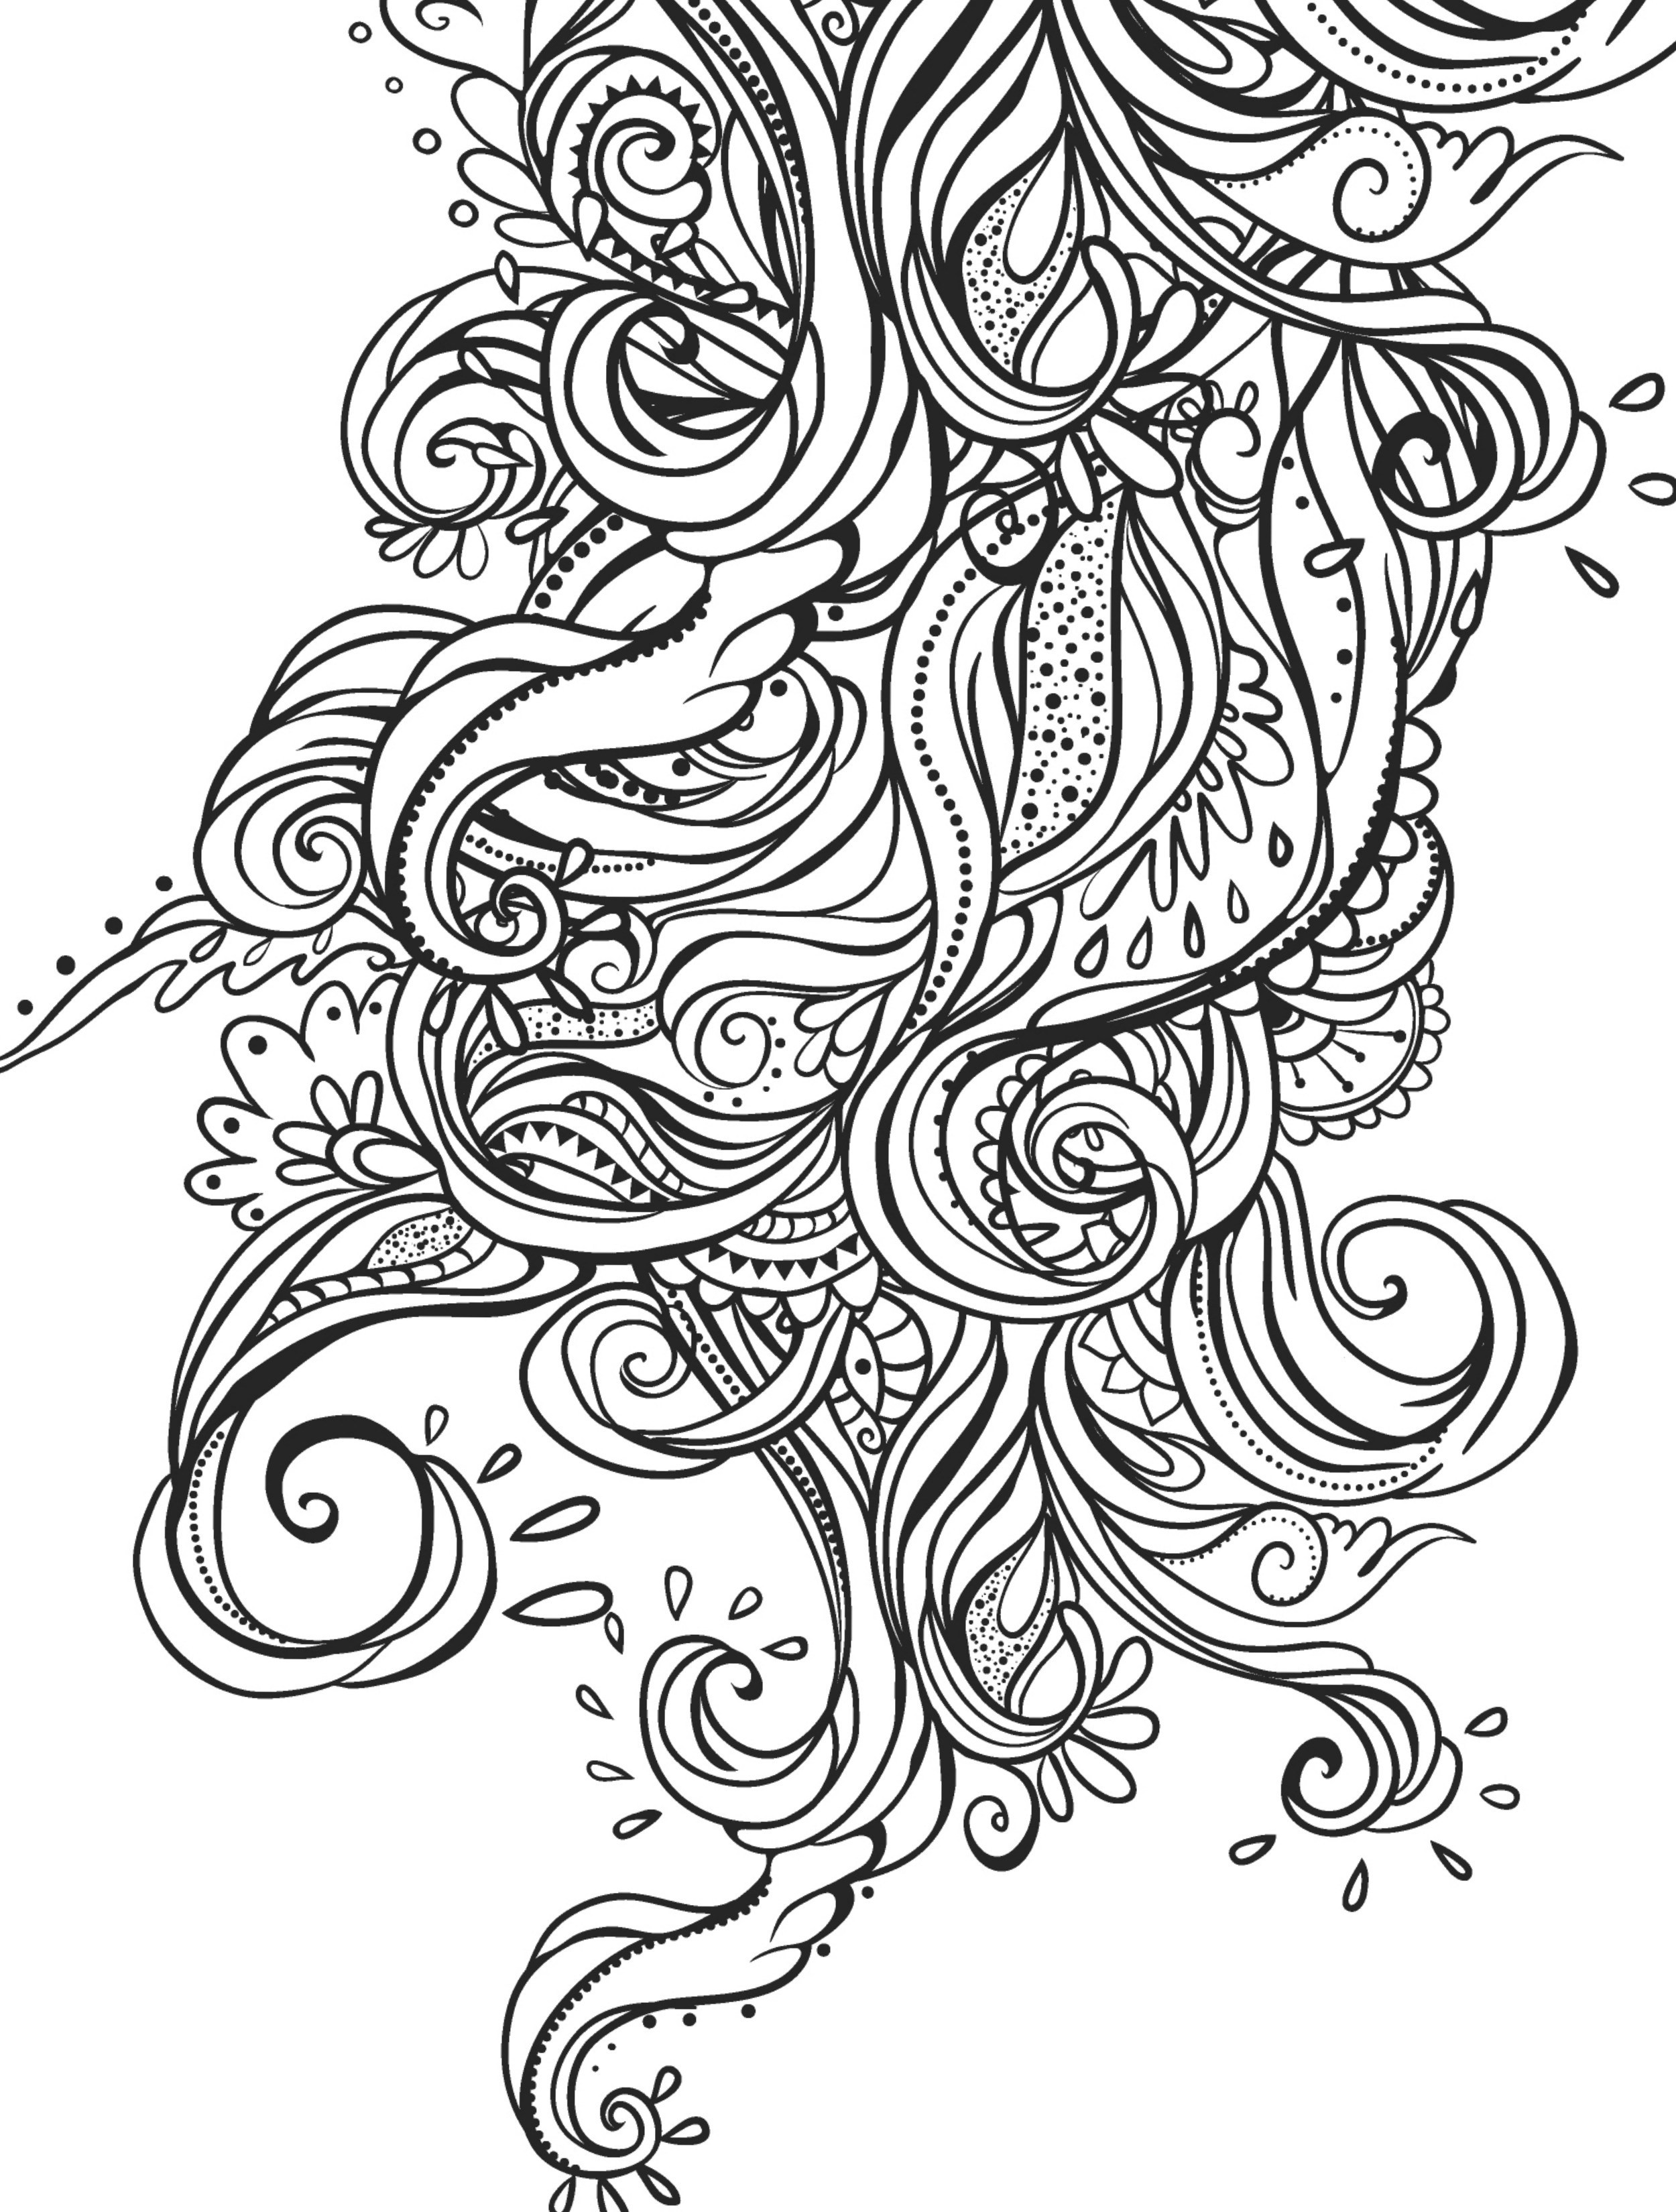 Girly Mandala Coloring Pages
 Girly Mandala Coloring Pages Collection Free Coloring Book